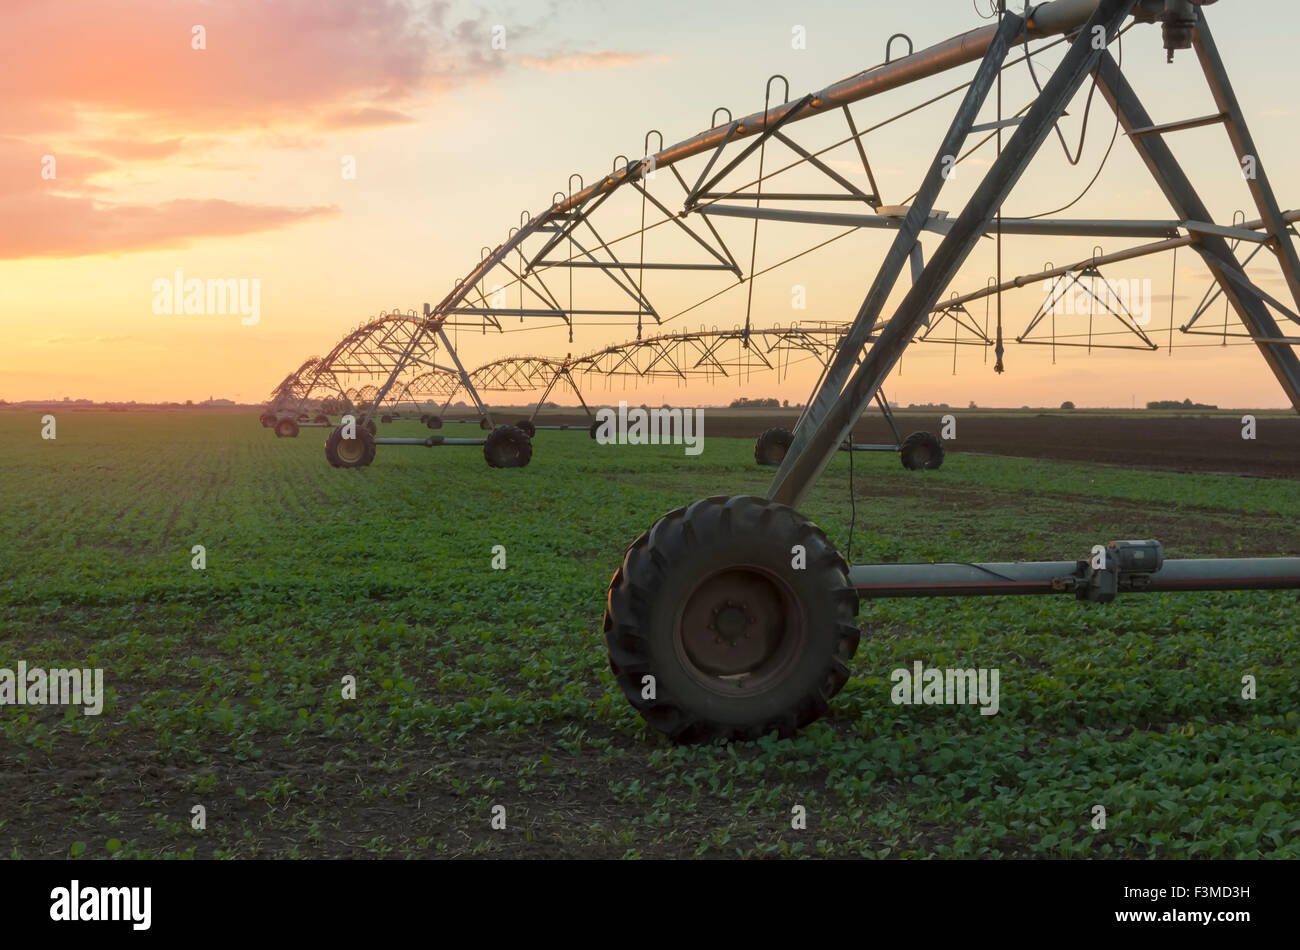 Modern irrigation system on a farm field at sunset. Selective focus. Stock Photo